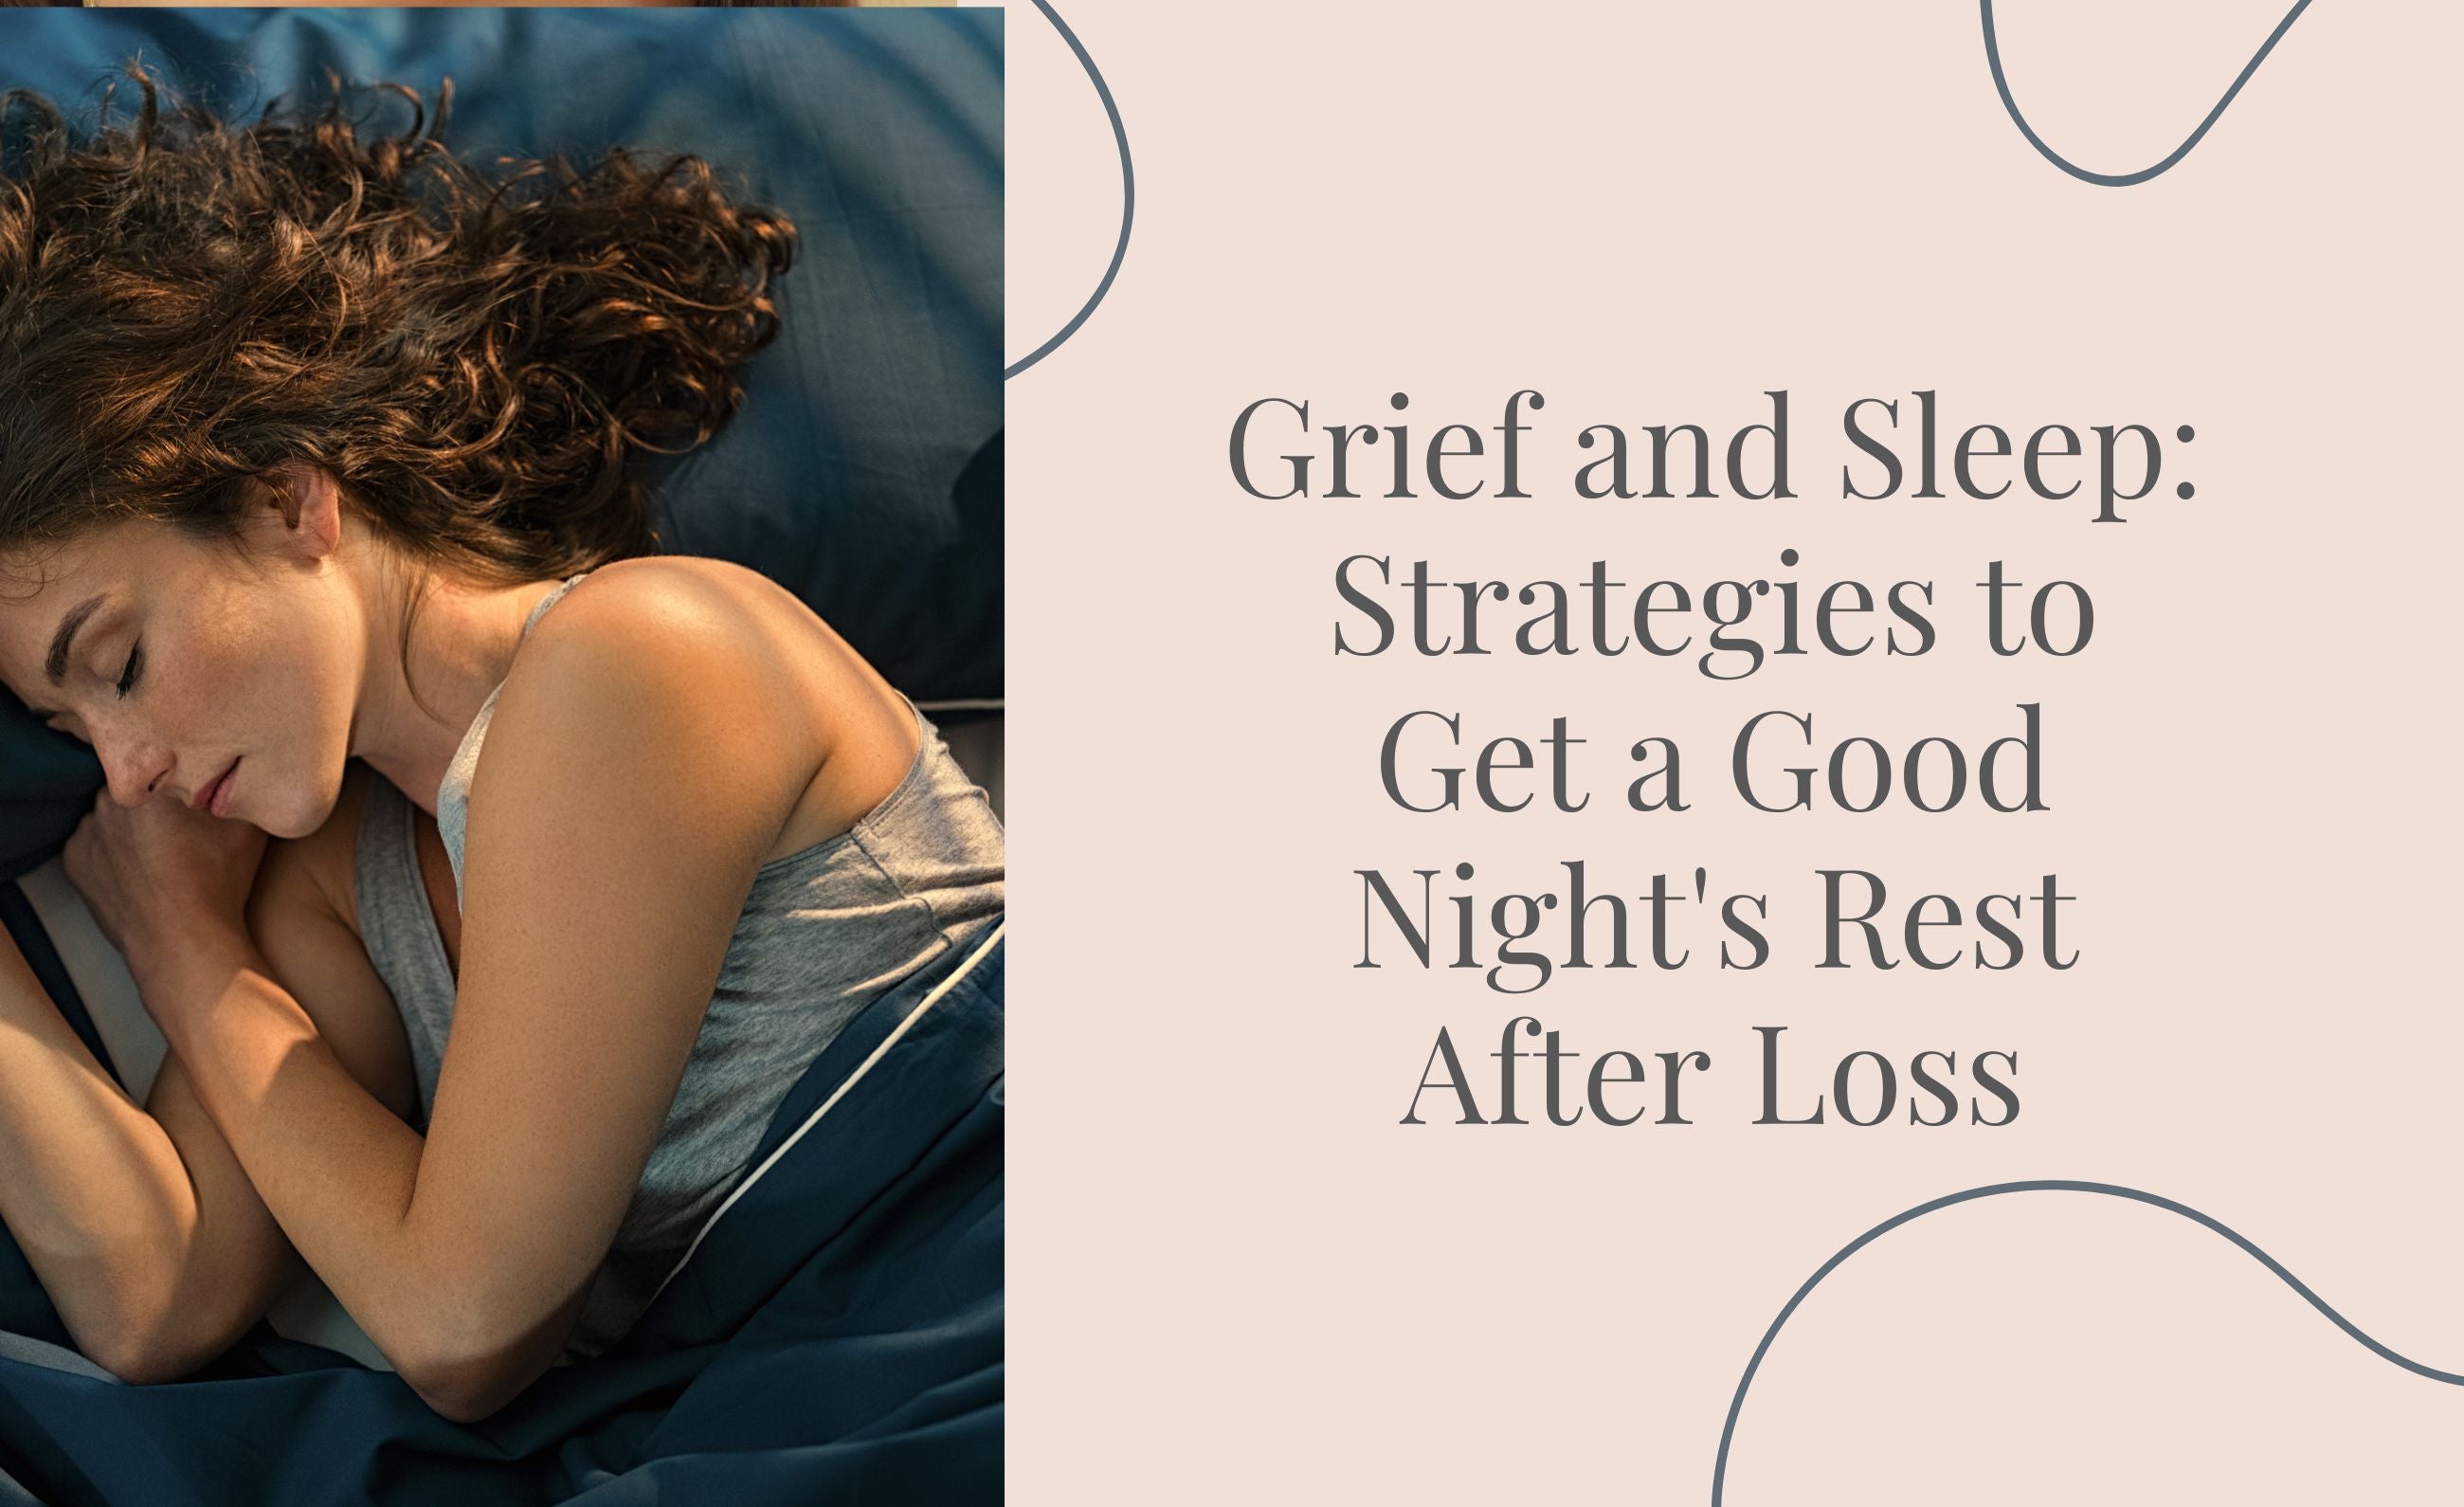 Grief and Sleep: Strategies to Get a Good Night's Rest After Loss